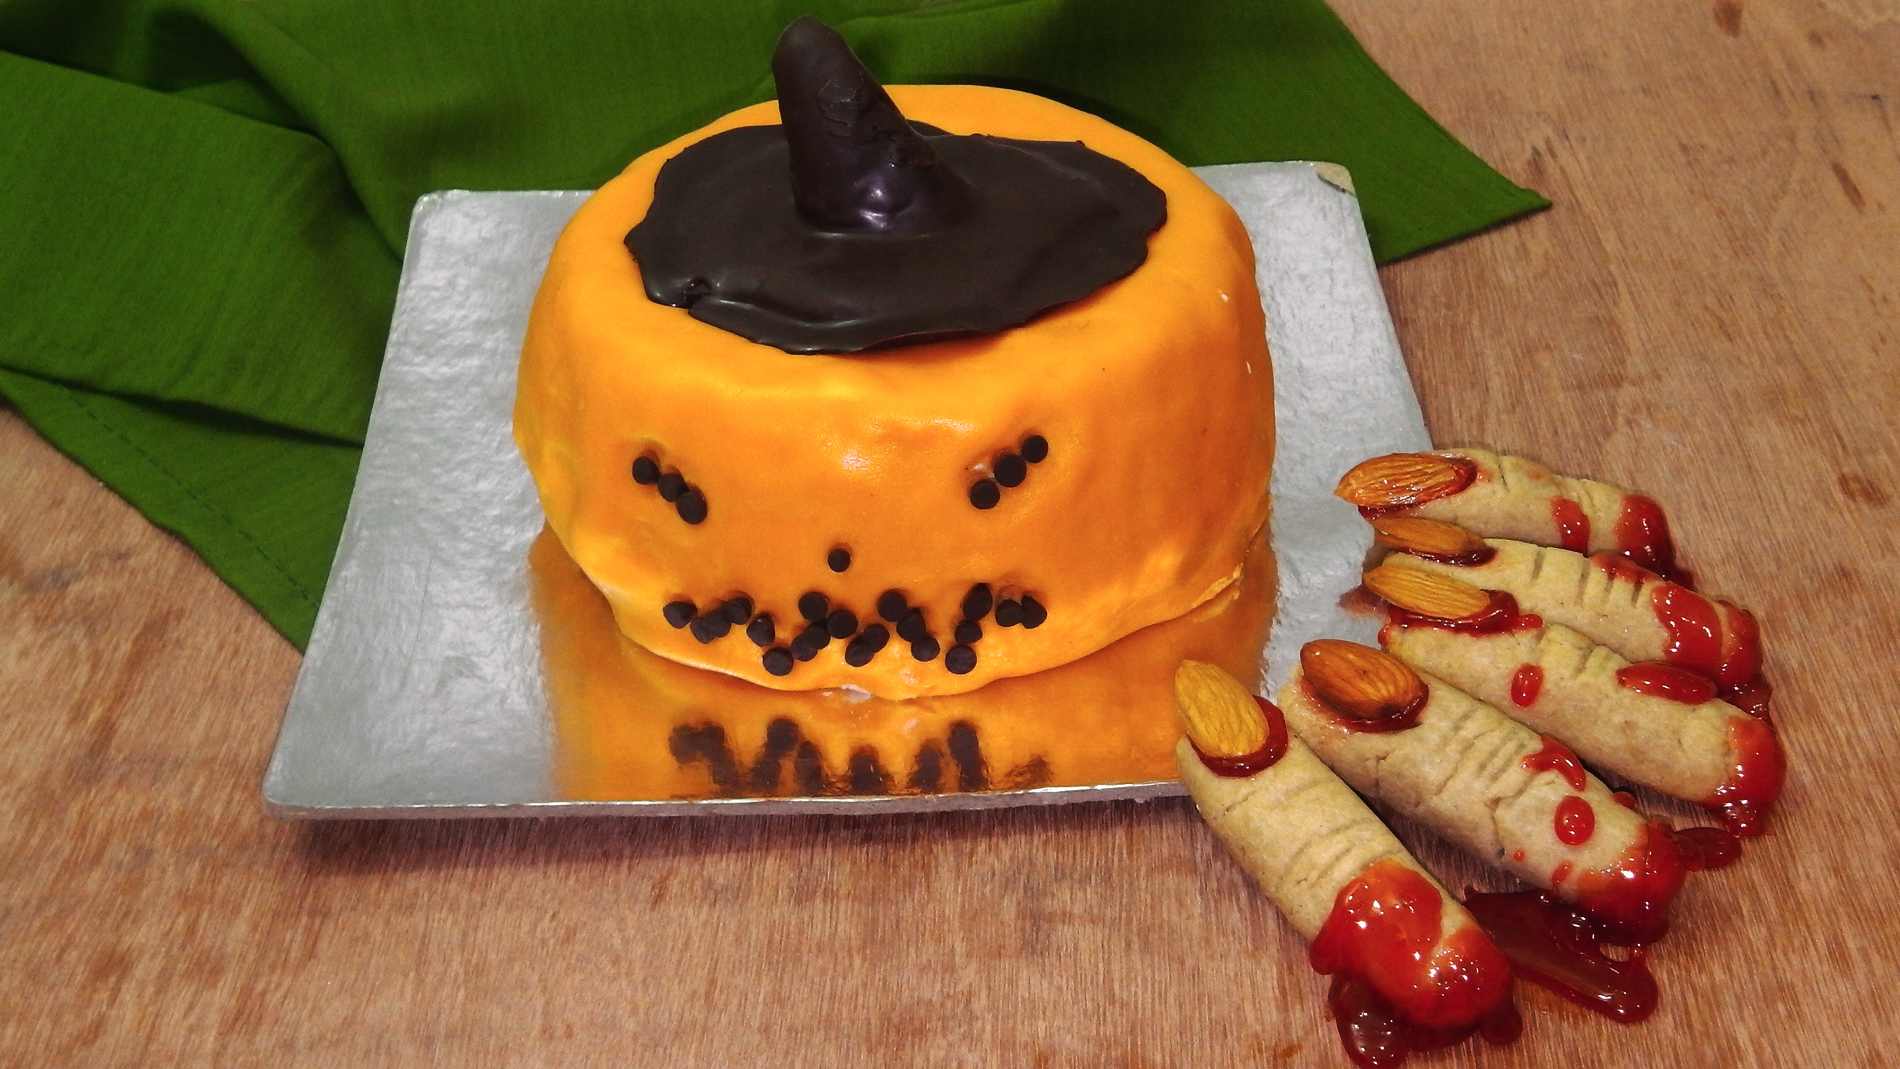 Pumpkin Cake Recipe - Halloween Special - Eggless Baking Without Oven